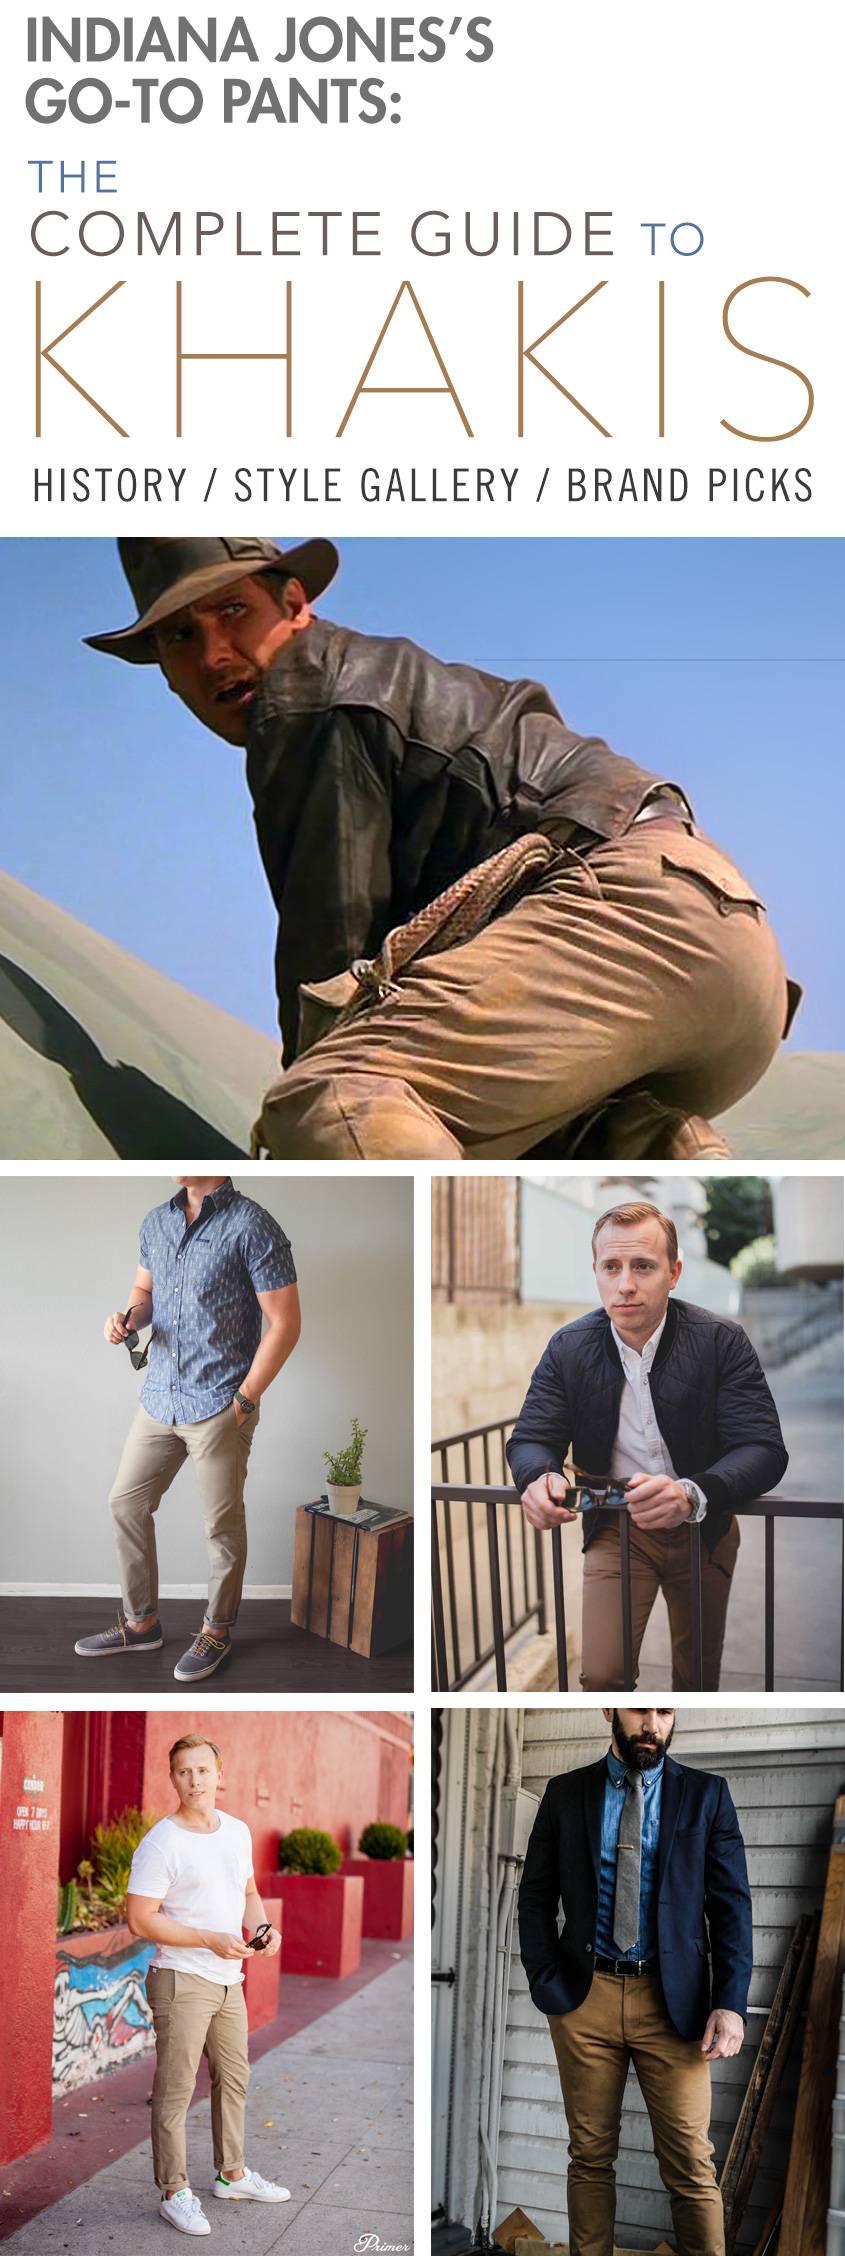 Indiana Jones's Go to Pants: A Complete Guide to Khakis   History / Outfit Inspiration Gallery / Brand Picks